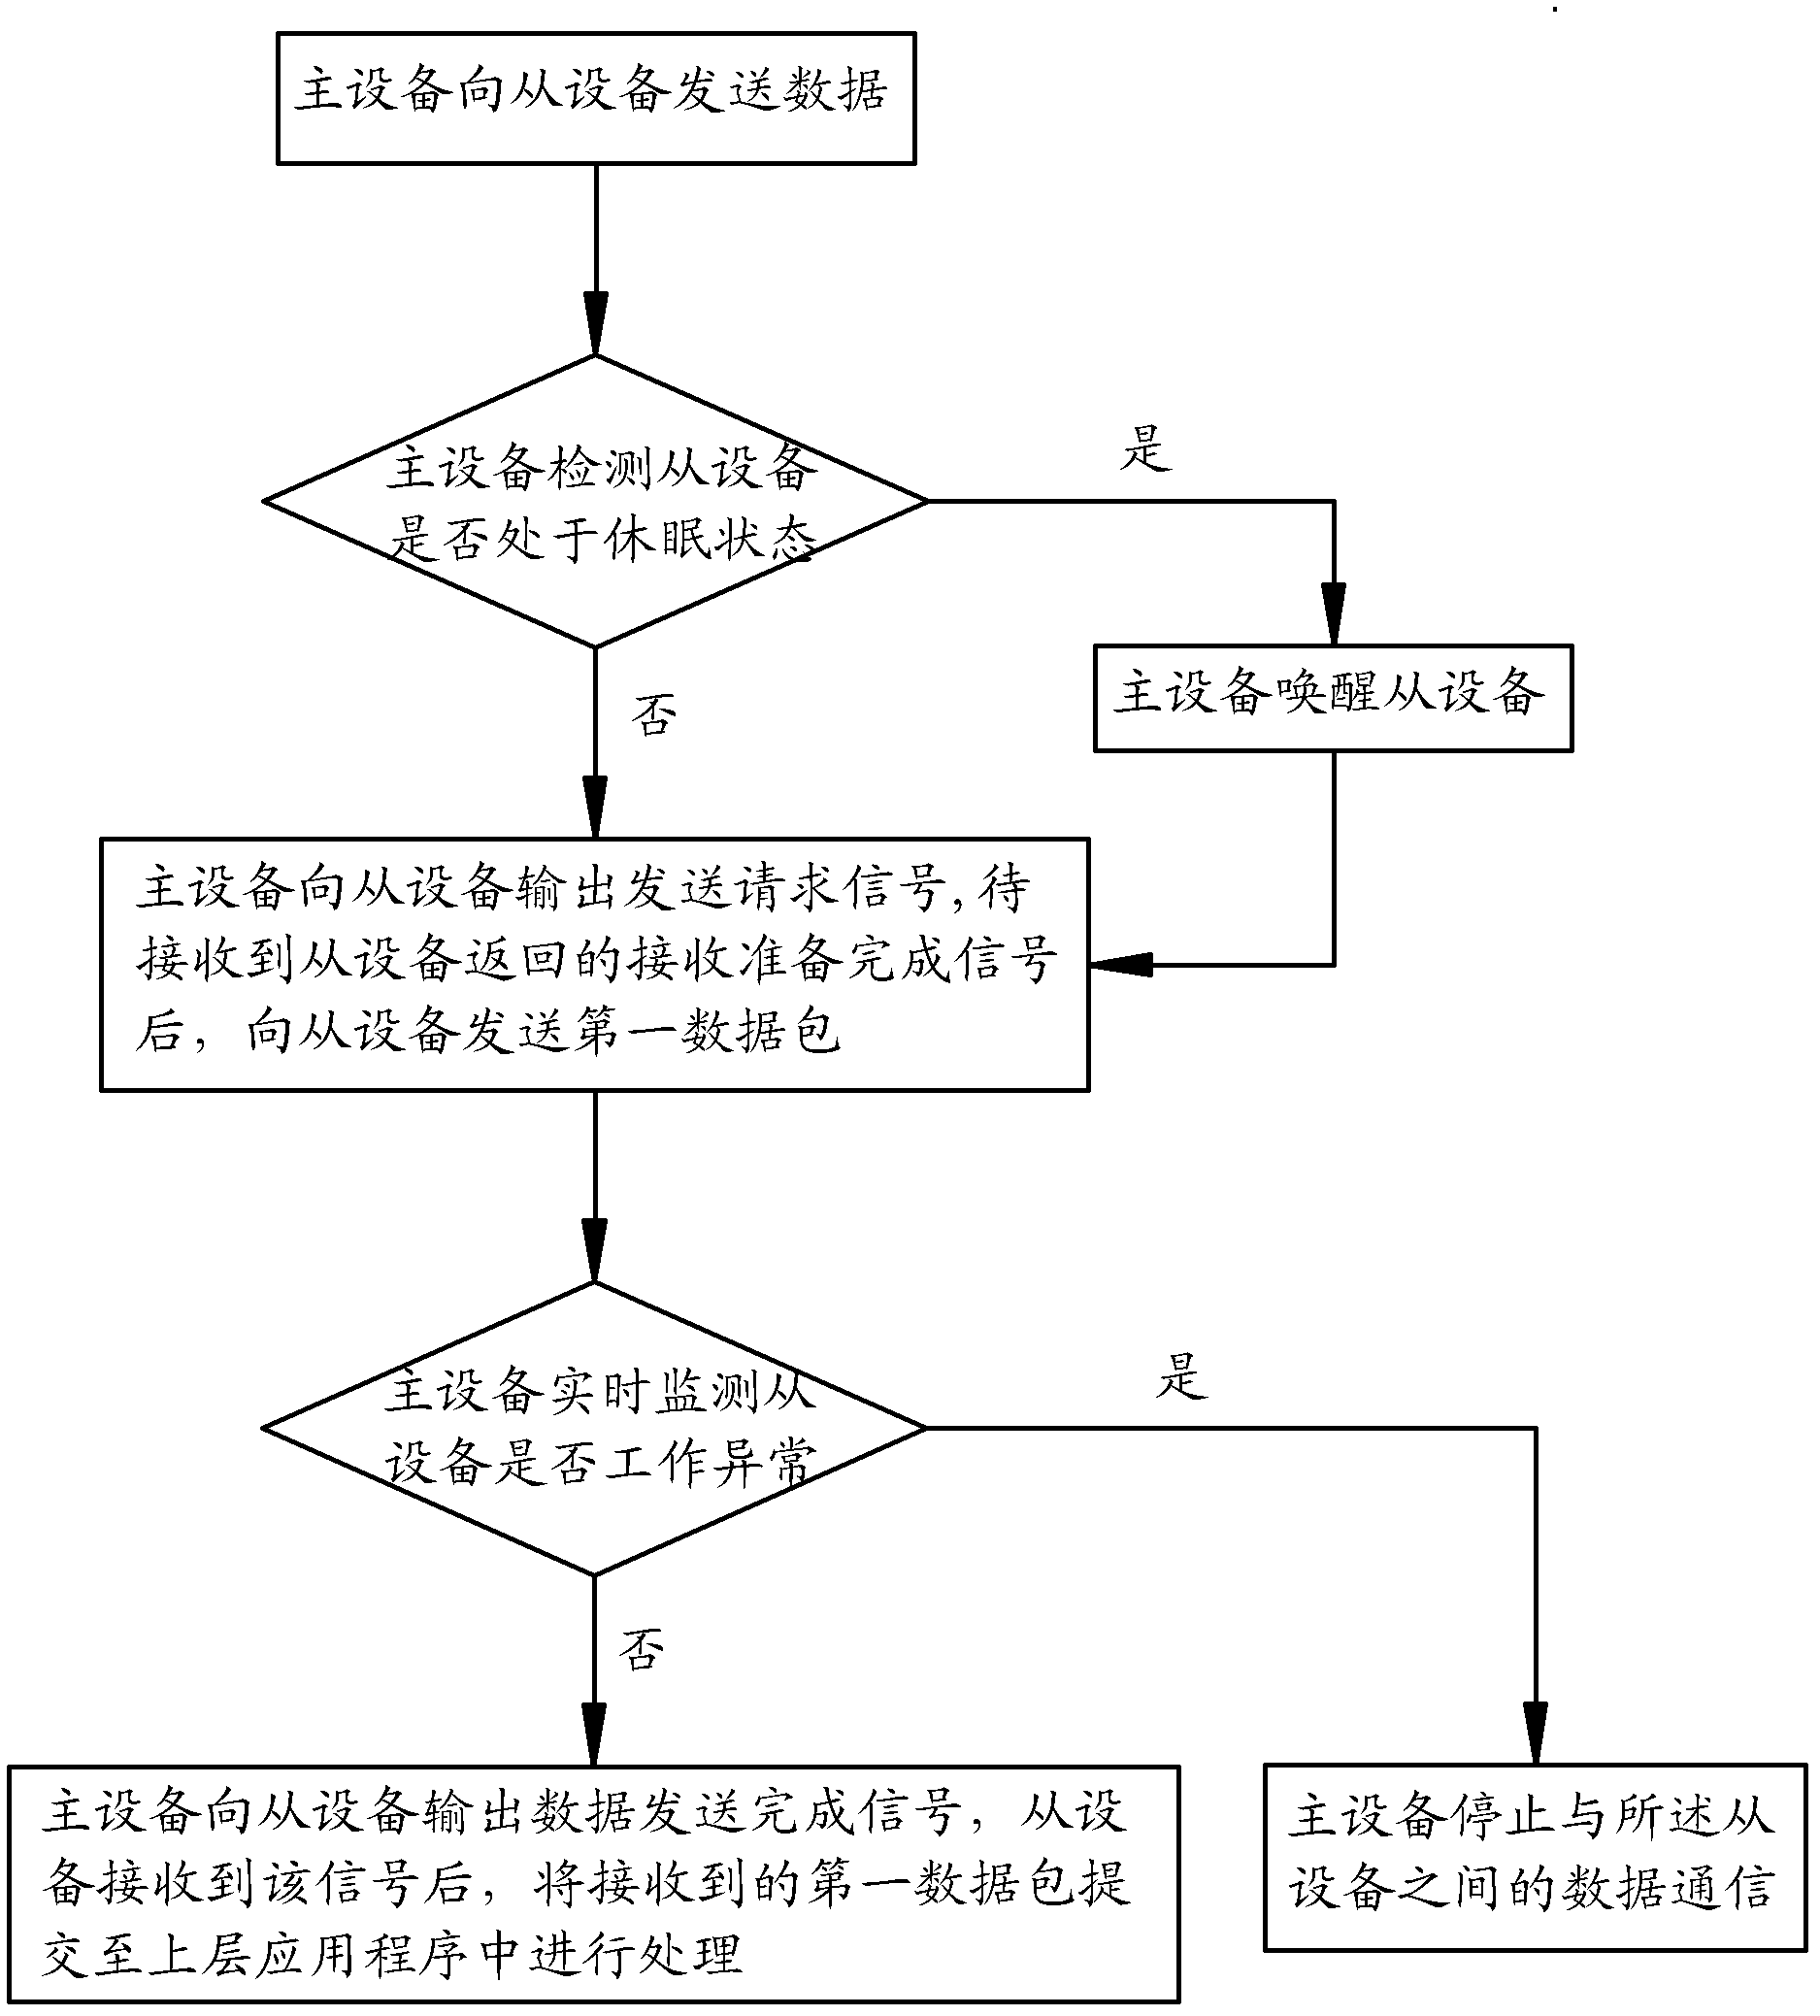 Serial communication system between devices and method